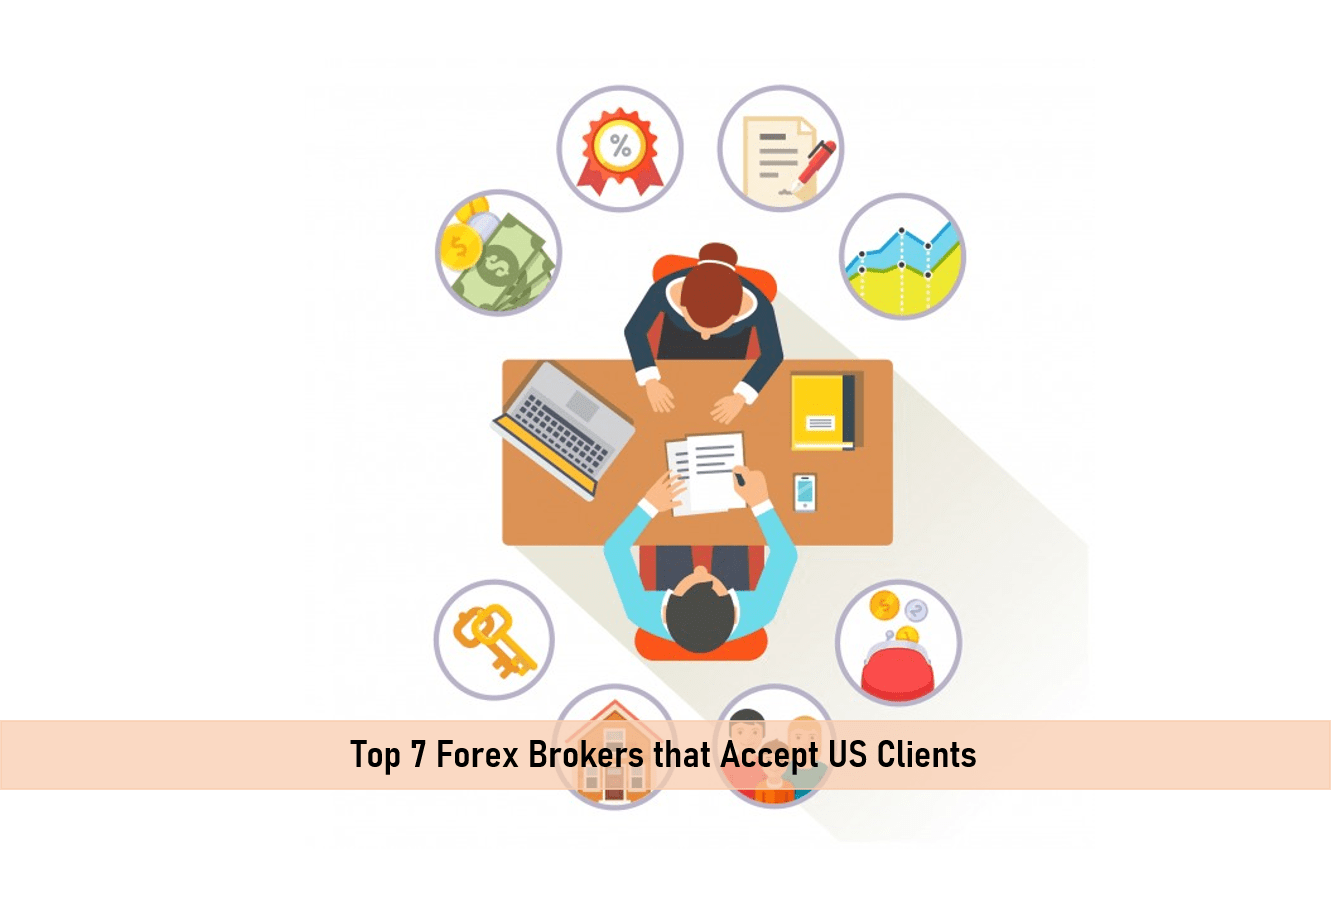 Top 7 Forex Brokers that Accept US Clients